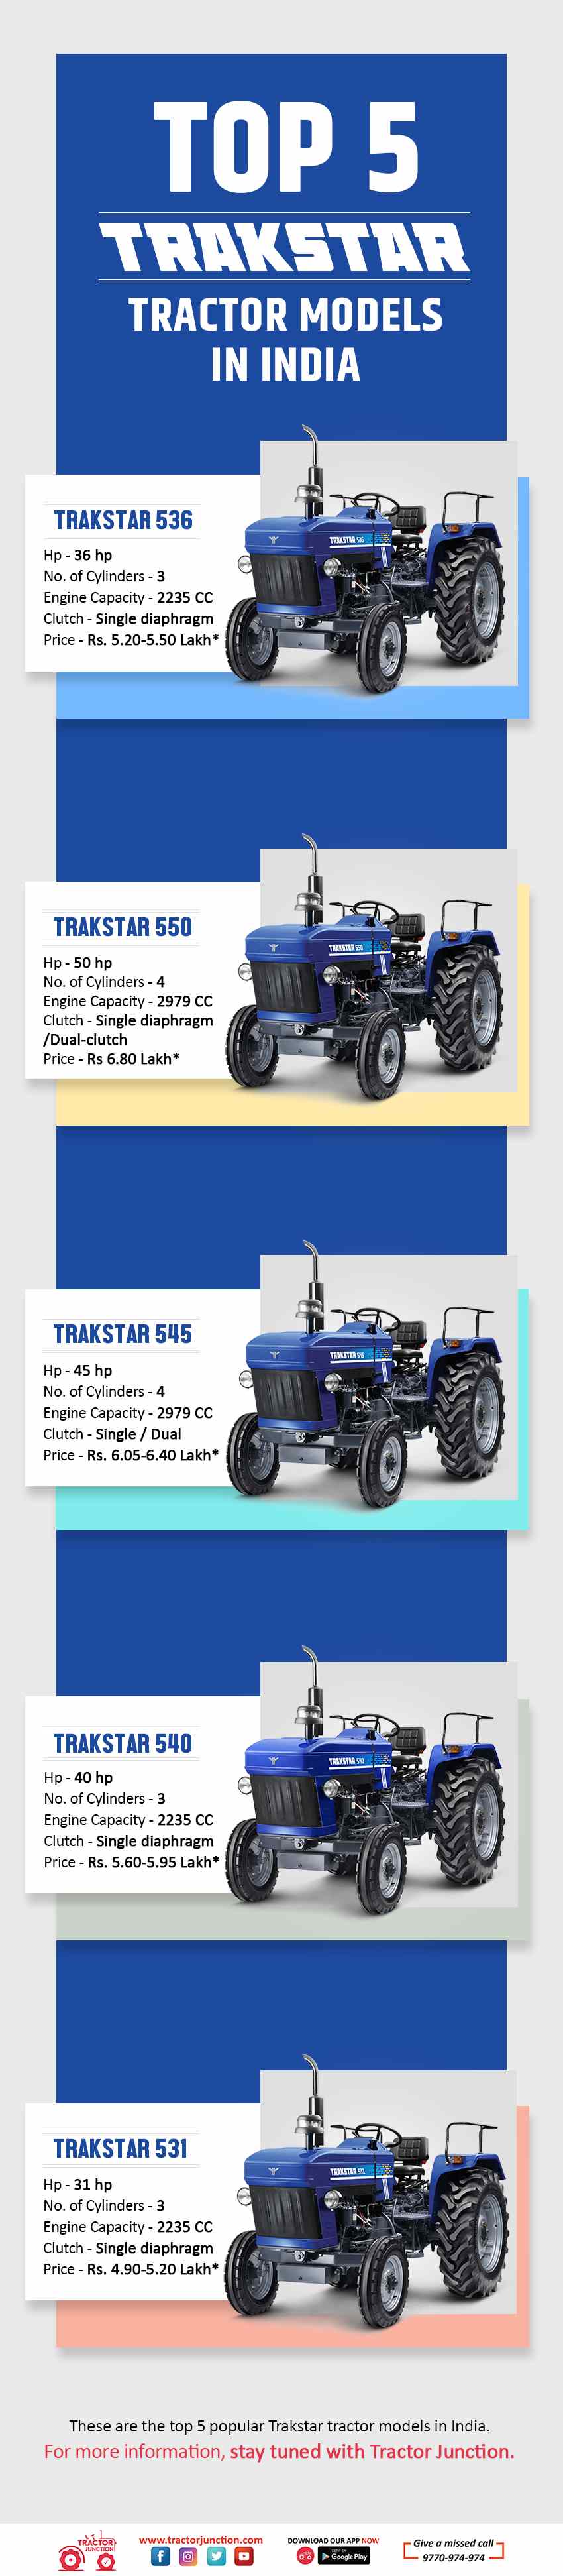 Top 5 Trakstar Tractor Models In India - Infographic 